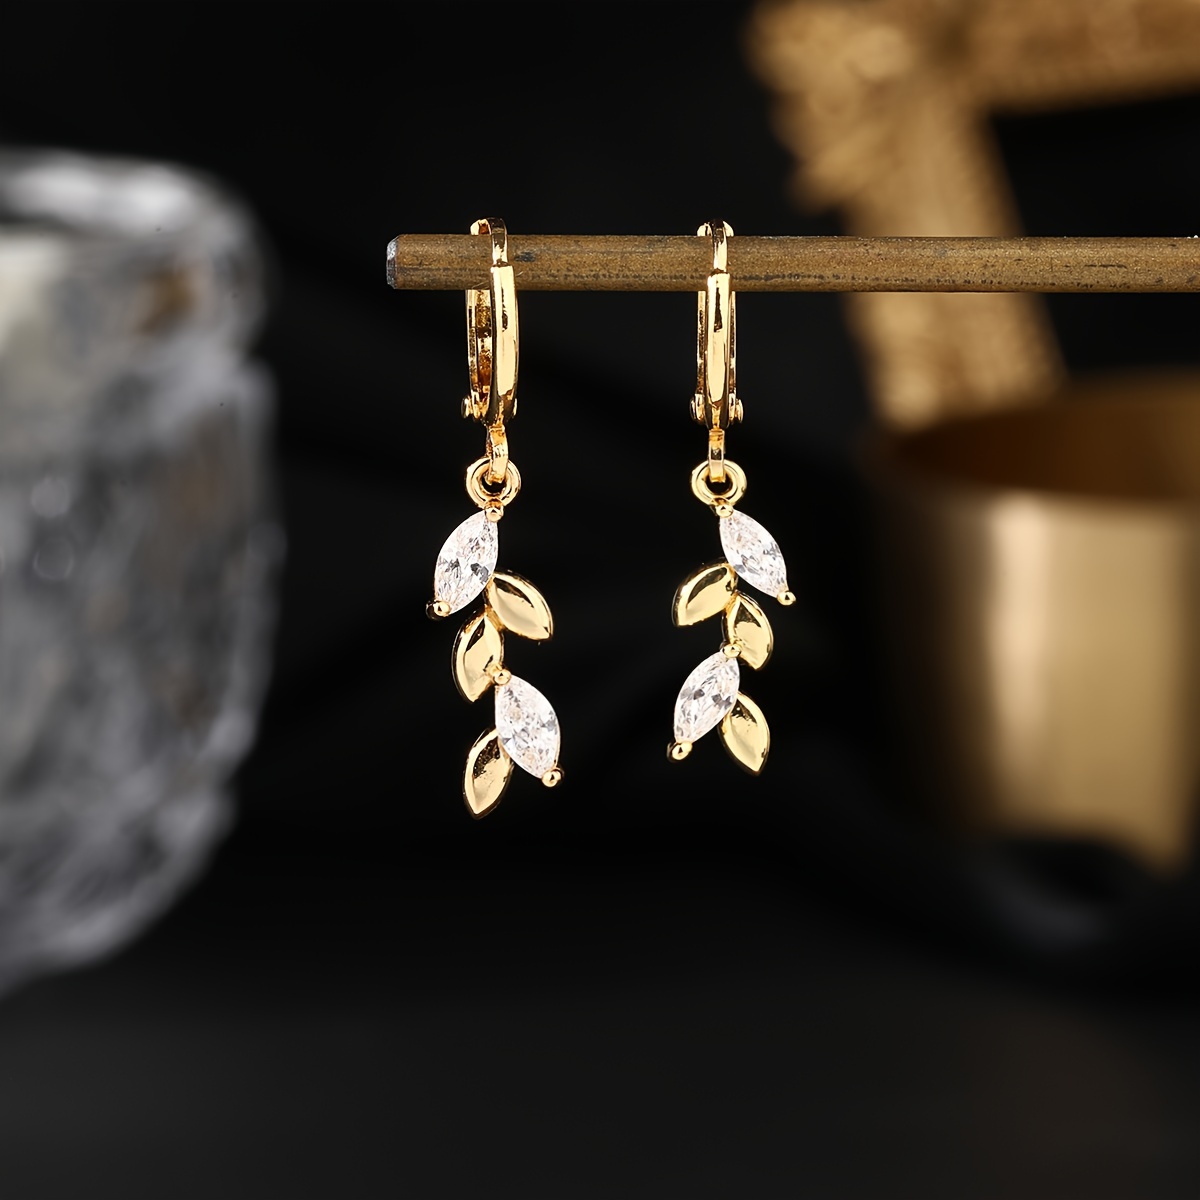 

1 Pair Dangle Earrings, Minimalist Pastoral Style With White Zirconia, Fashionable Hinge Hoops For Elegant Accessory